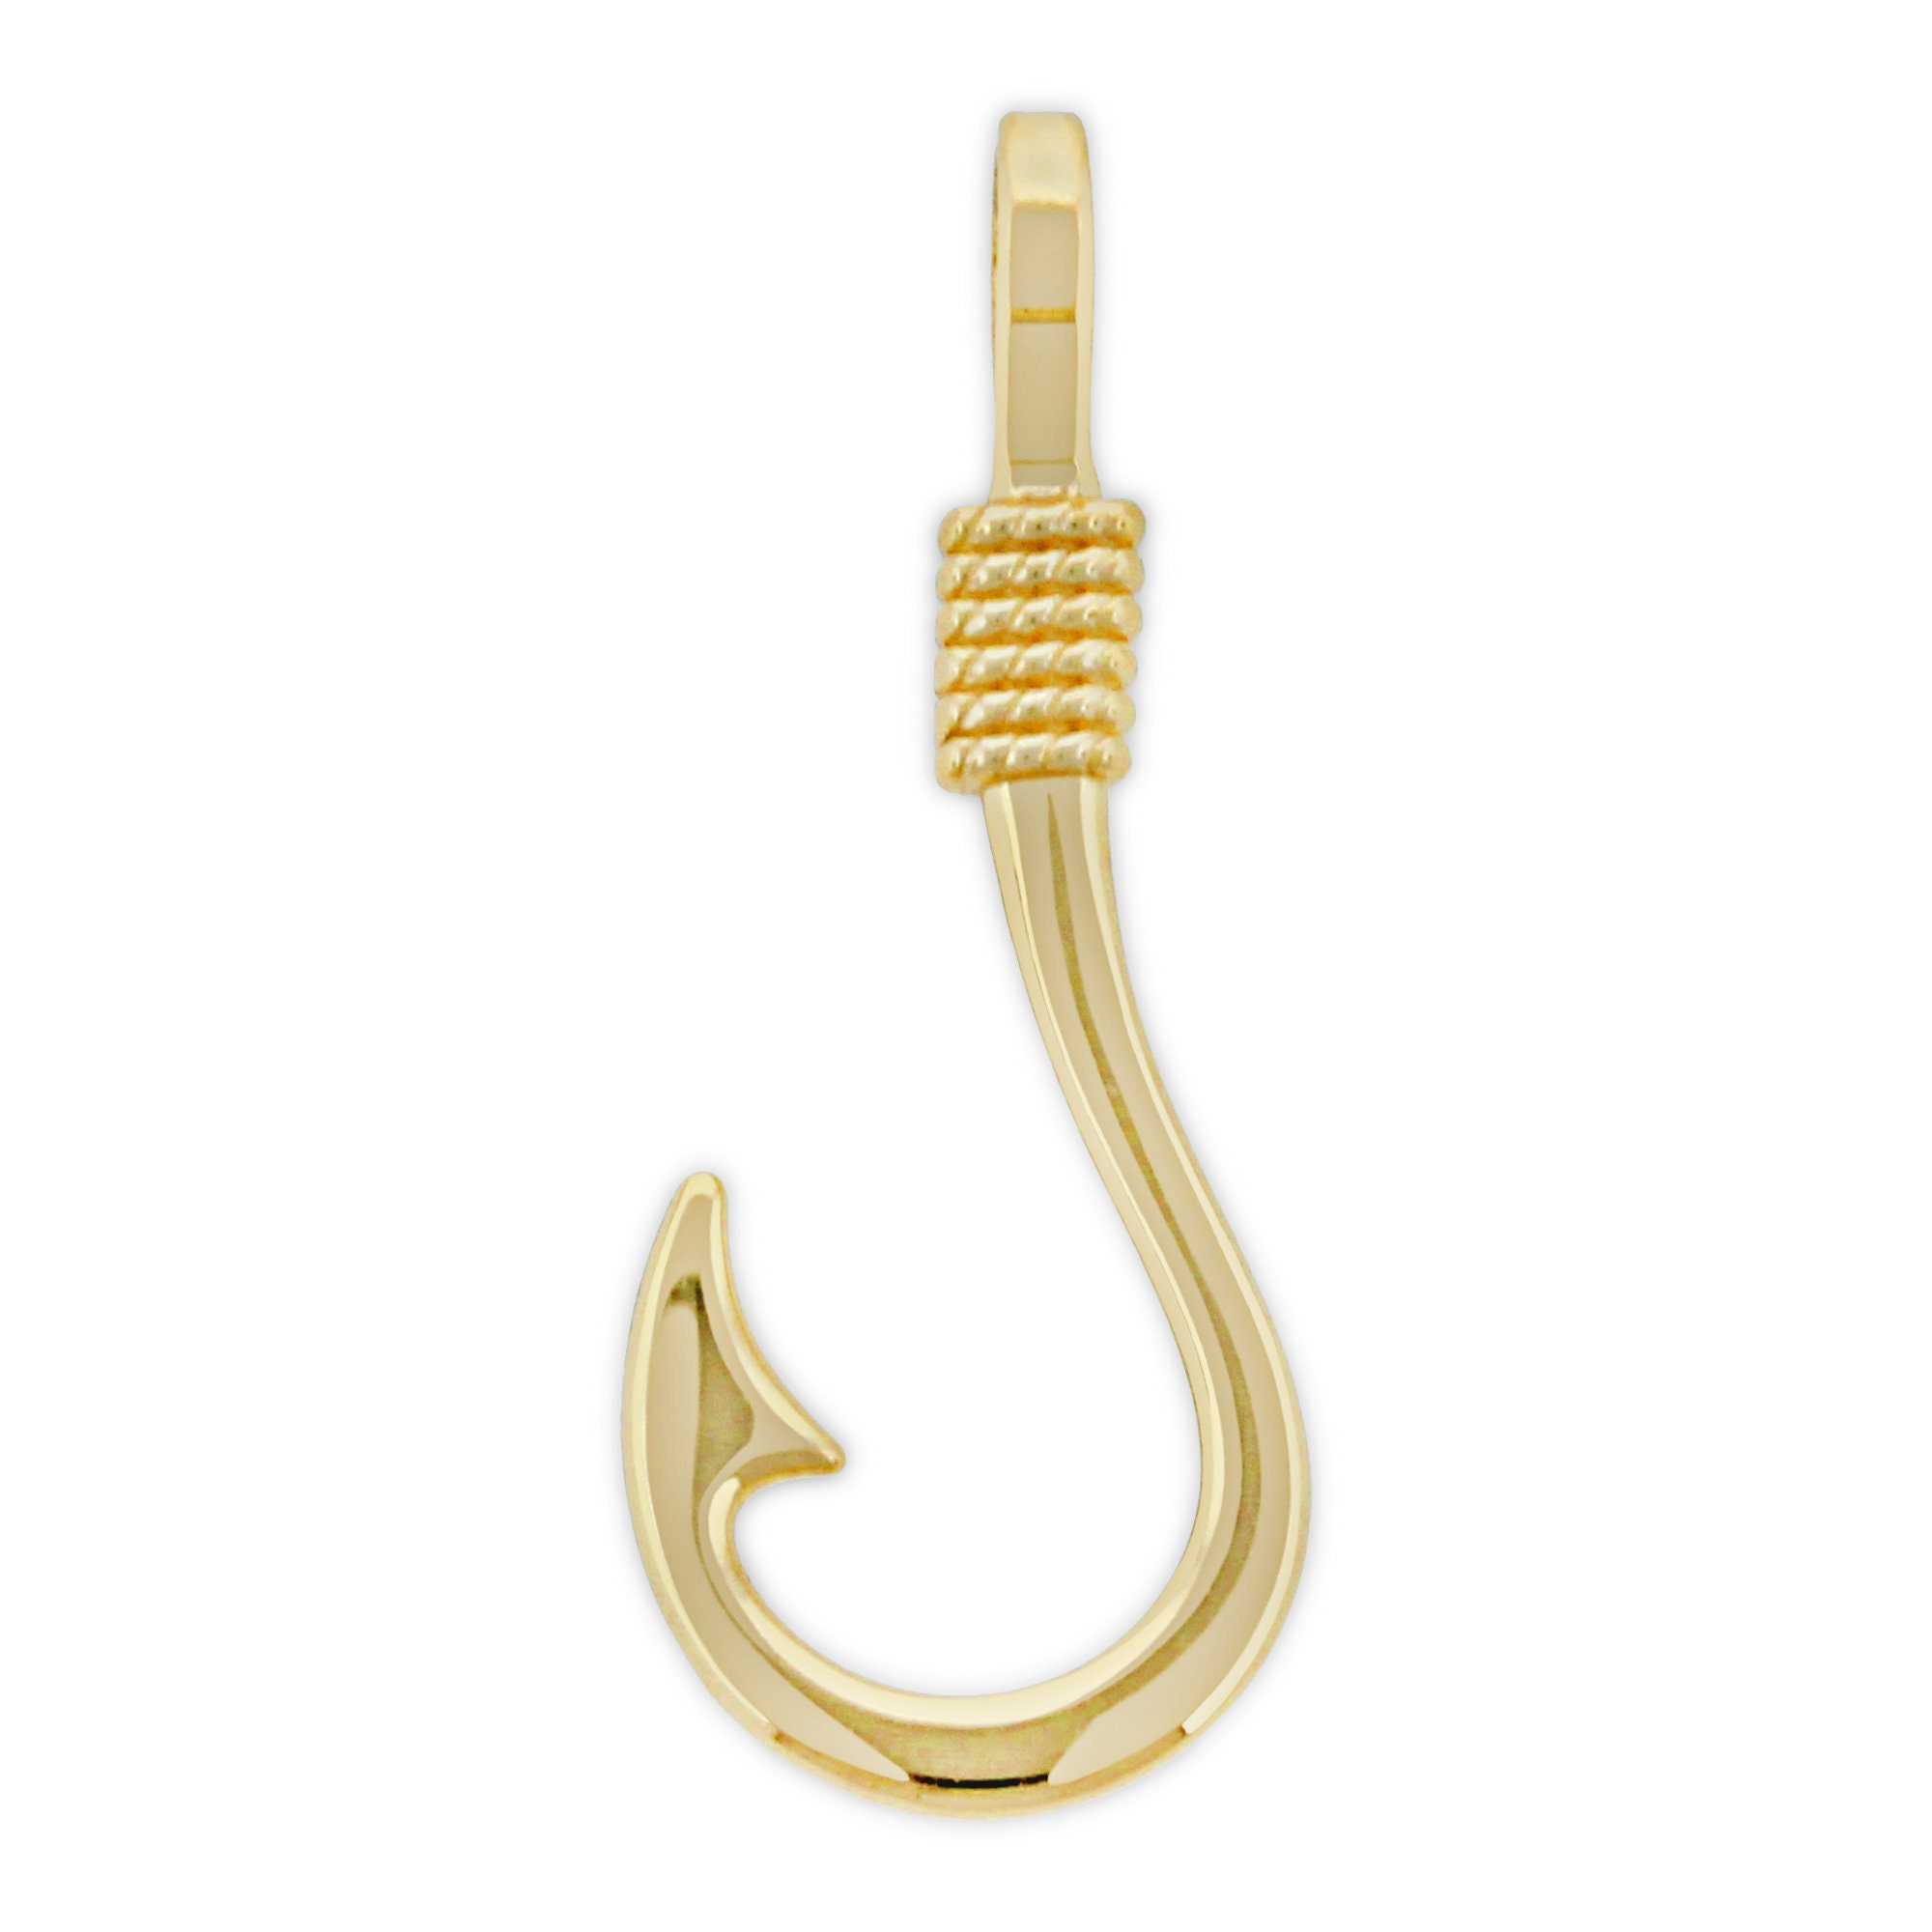 Gold Fish Hook Charm - 10 Karat Solid Gold with Optional Gold Chain- Fish Hook Necklace - Hook Pendant